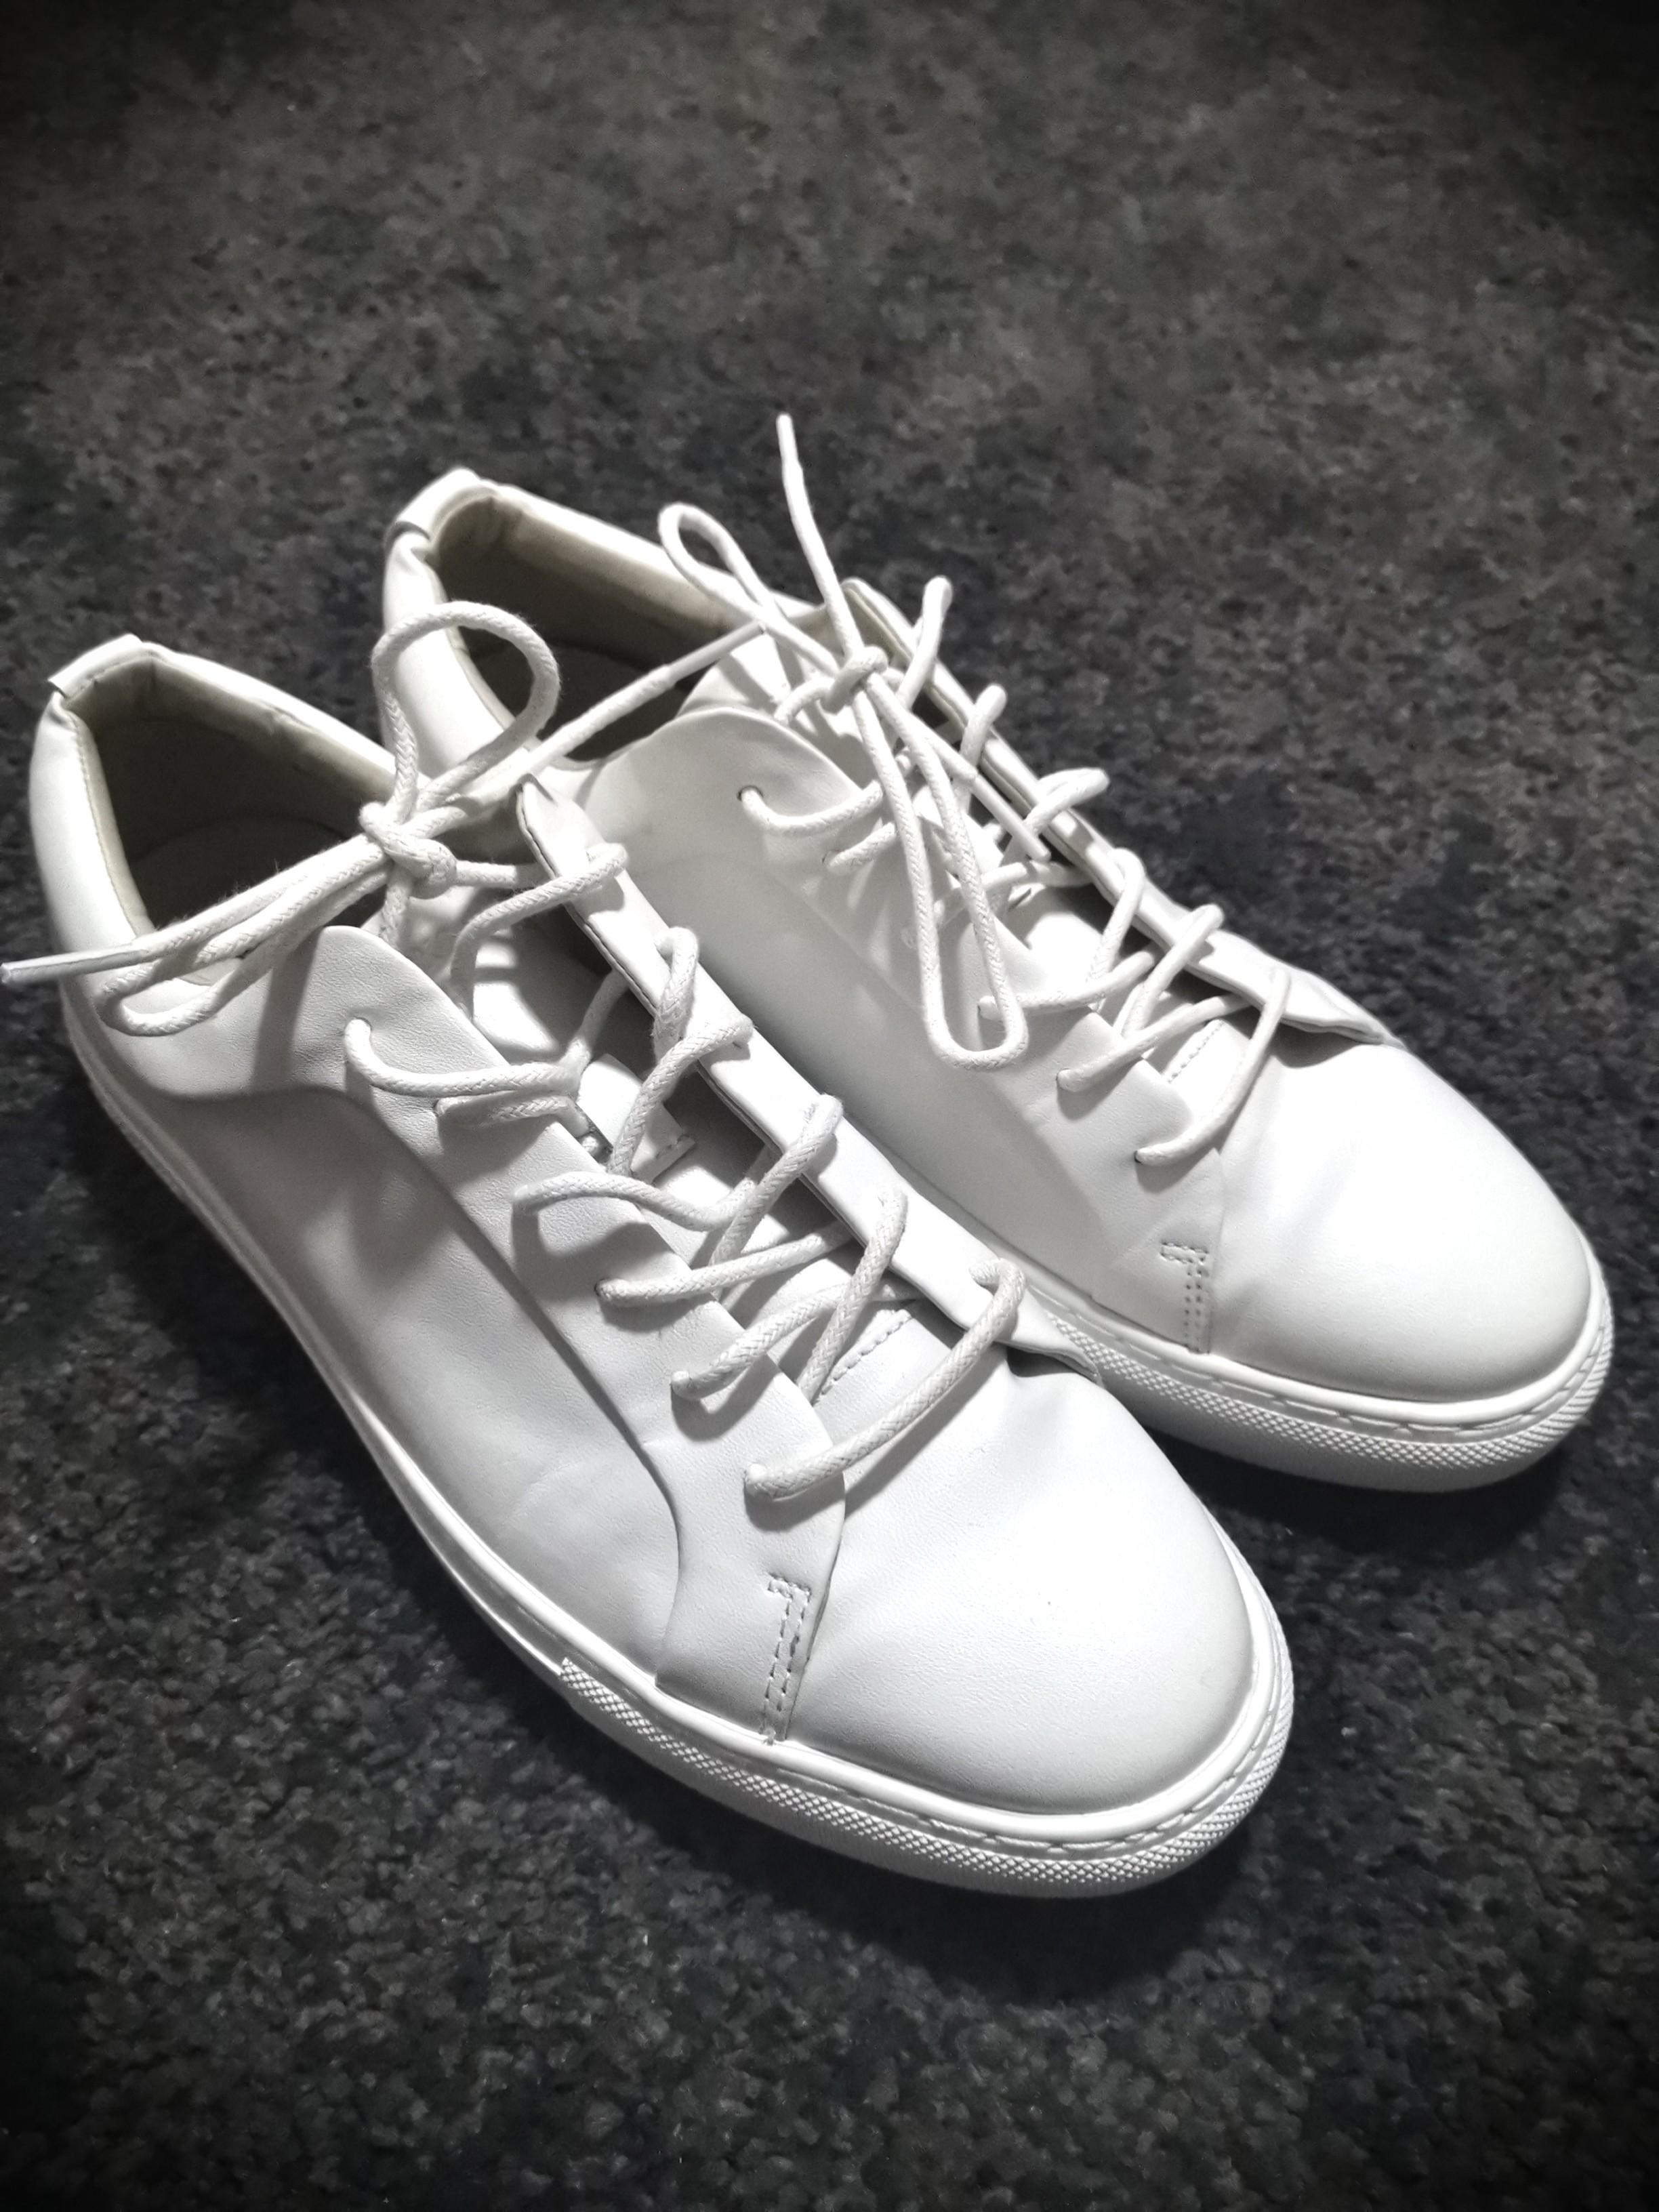 jack and jones white shoes